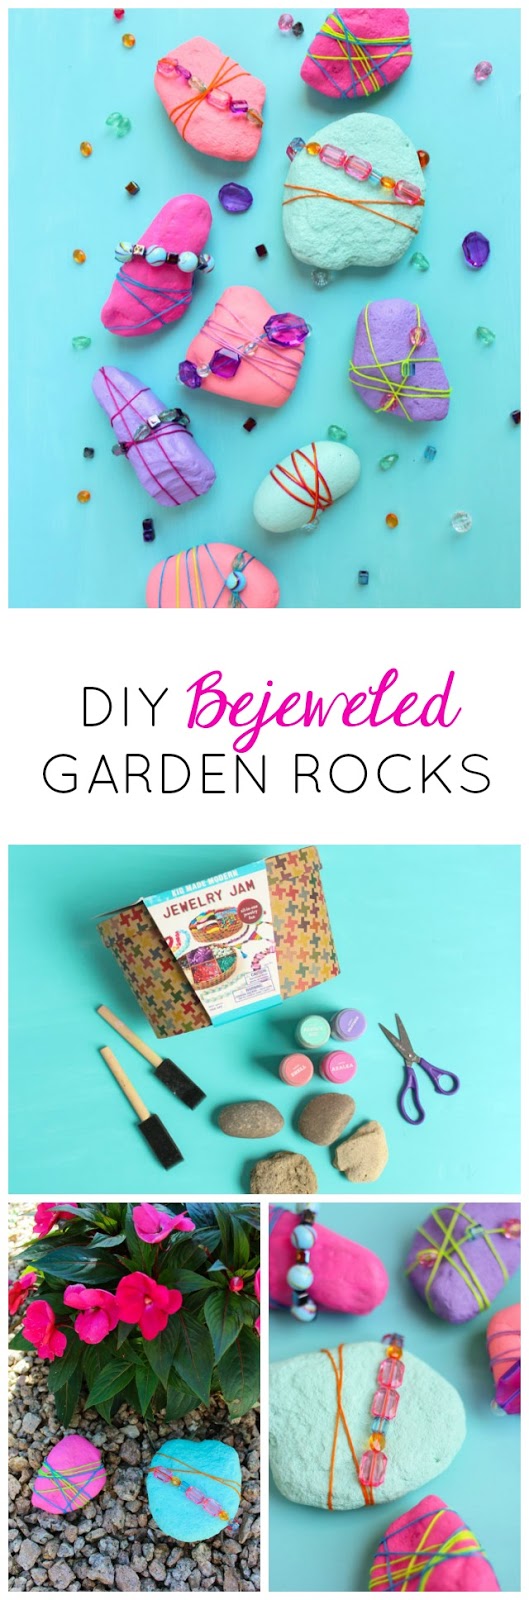 Rocks never looked so pretty! Decorate them with beads and jewels for pretty garden rocks or paperweights! #rockpainting #gardenrocks #kidscraft #naturecraft #kidmademodern